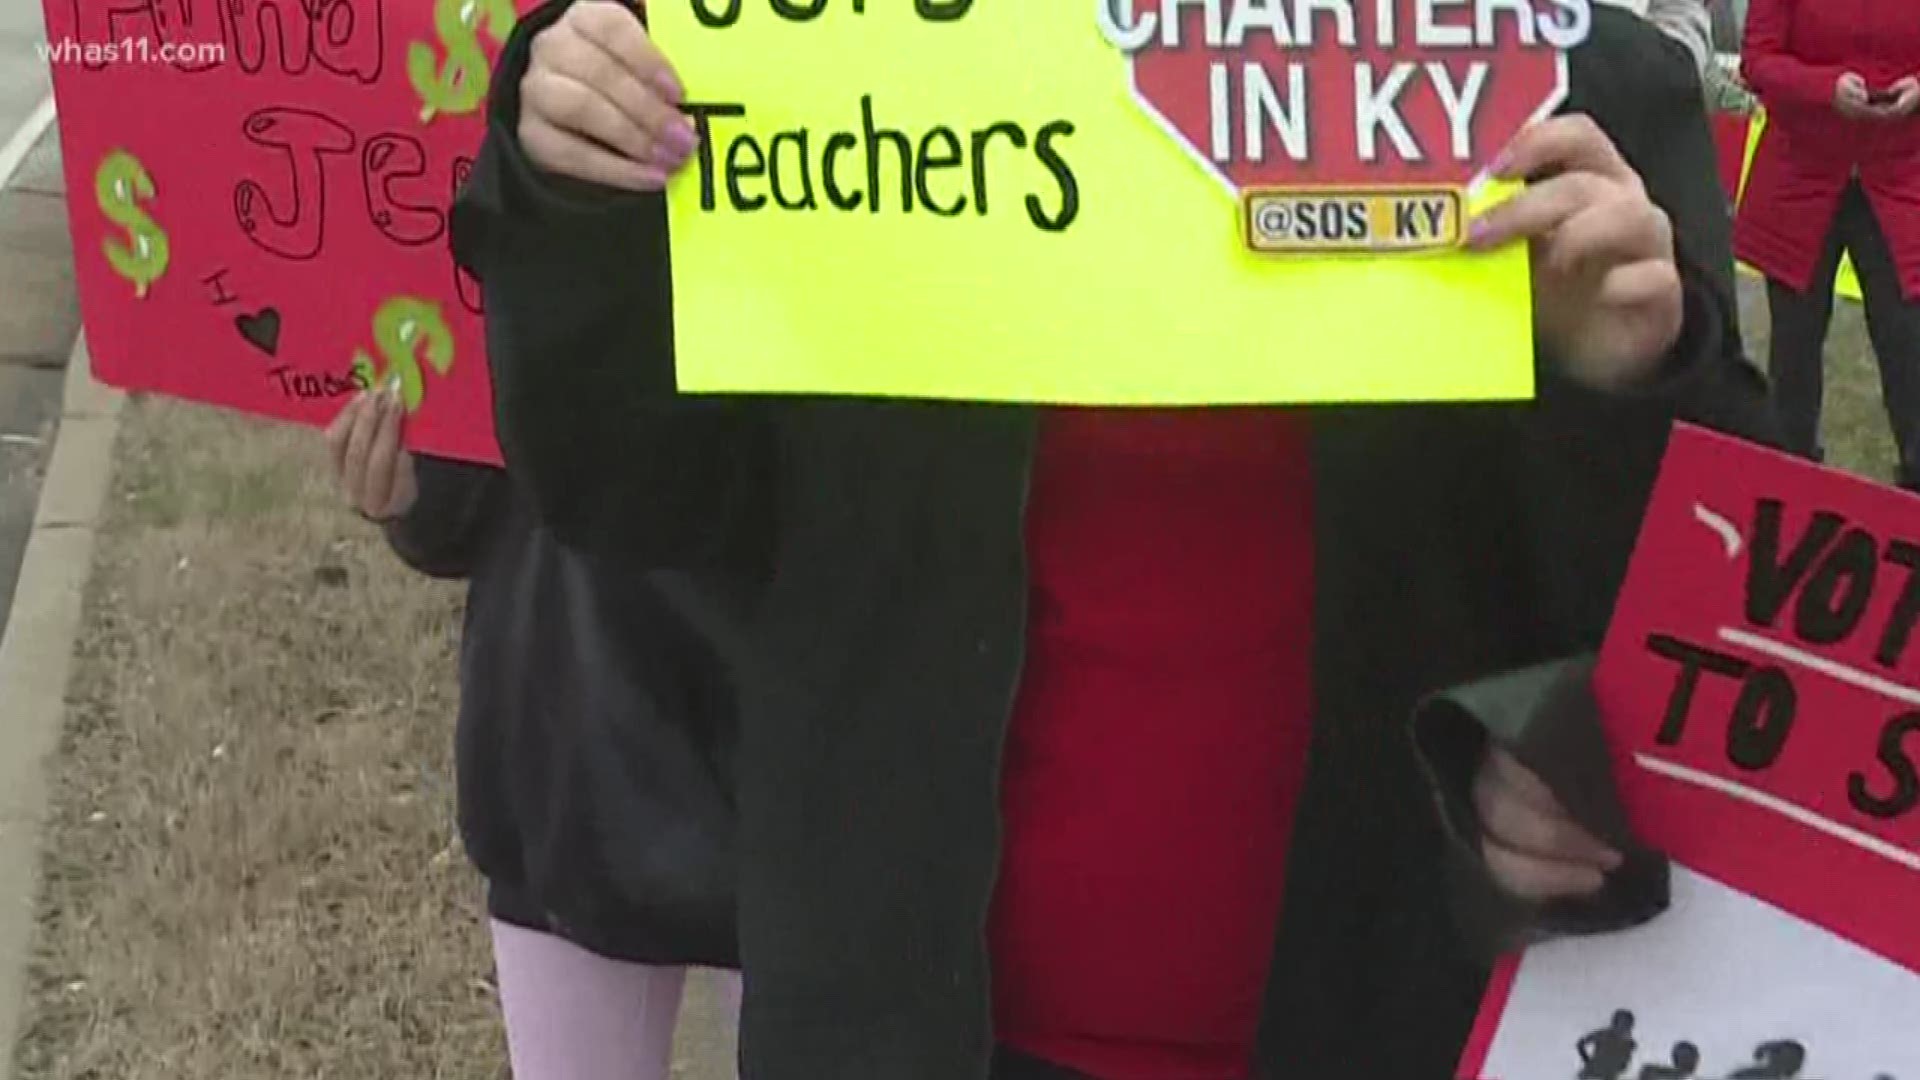 For the fifth time in two weeks JCPS is closed due to a teacher sick-out.